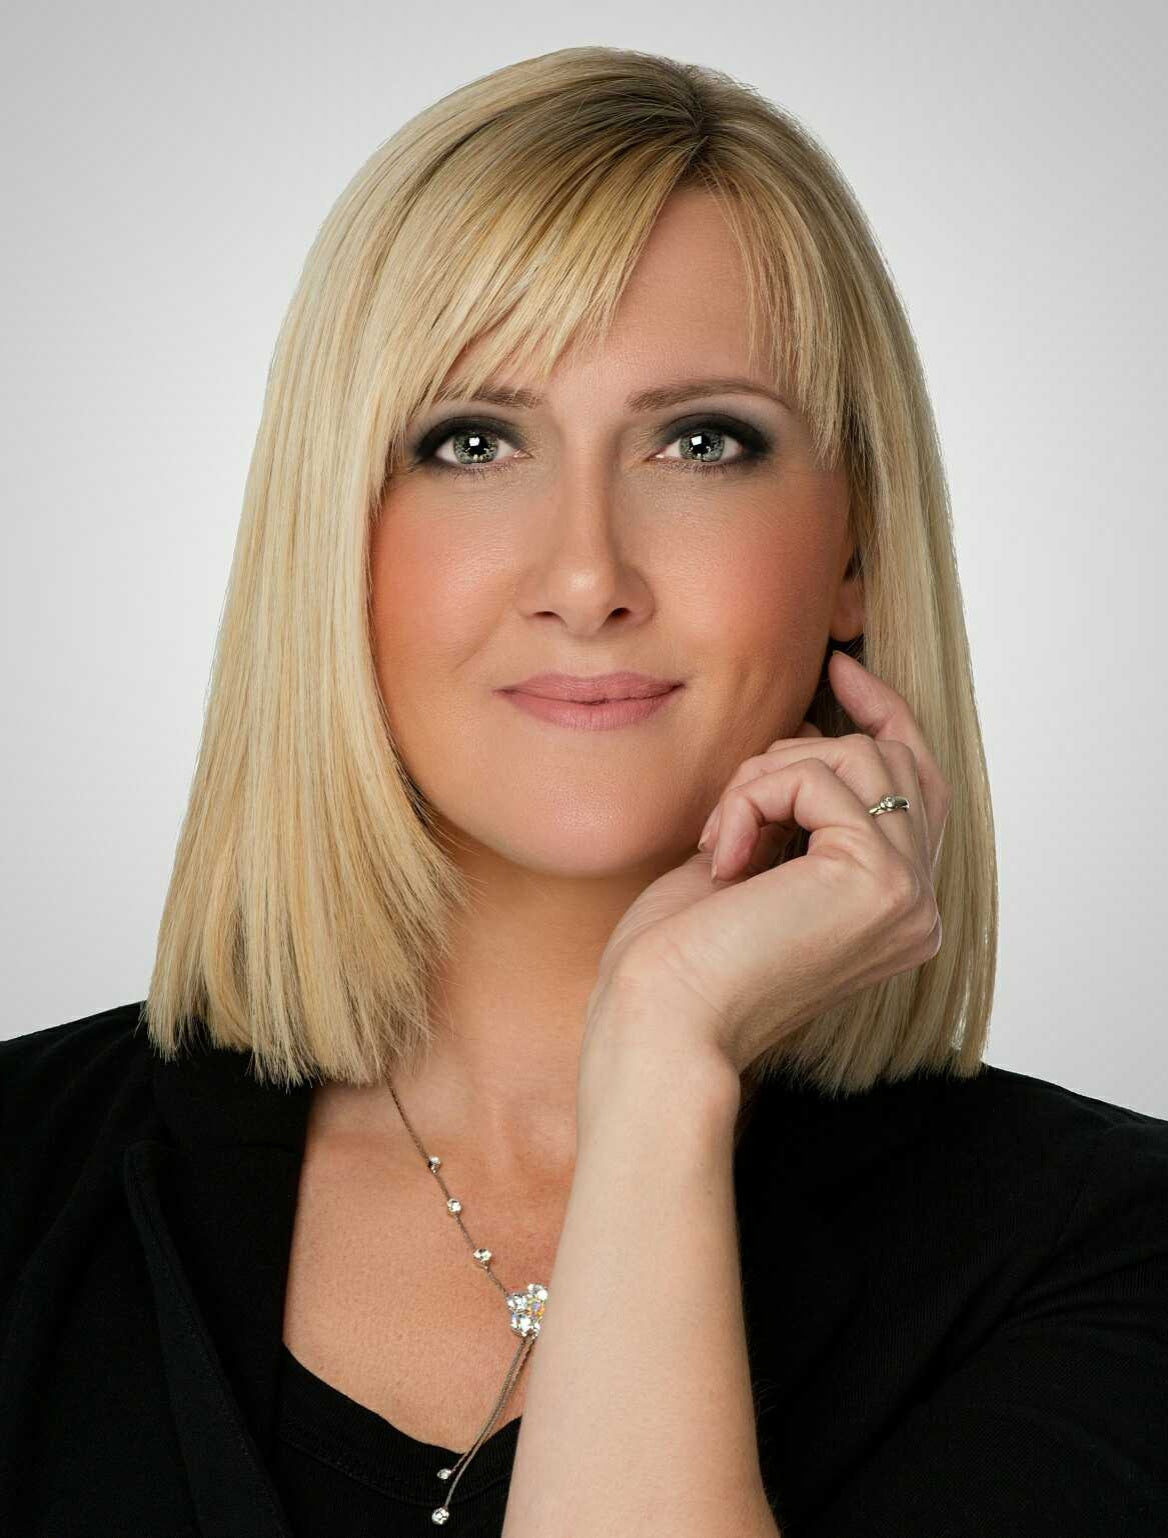 nadine, founder of barefaced beauty and maker of mineral foundation powders